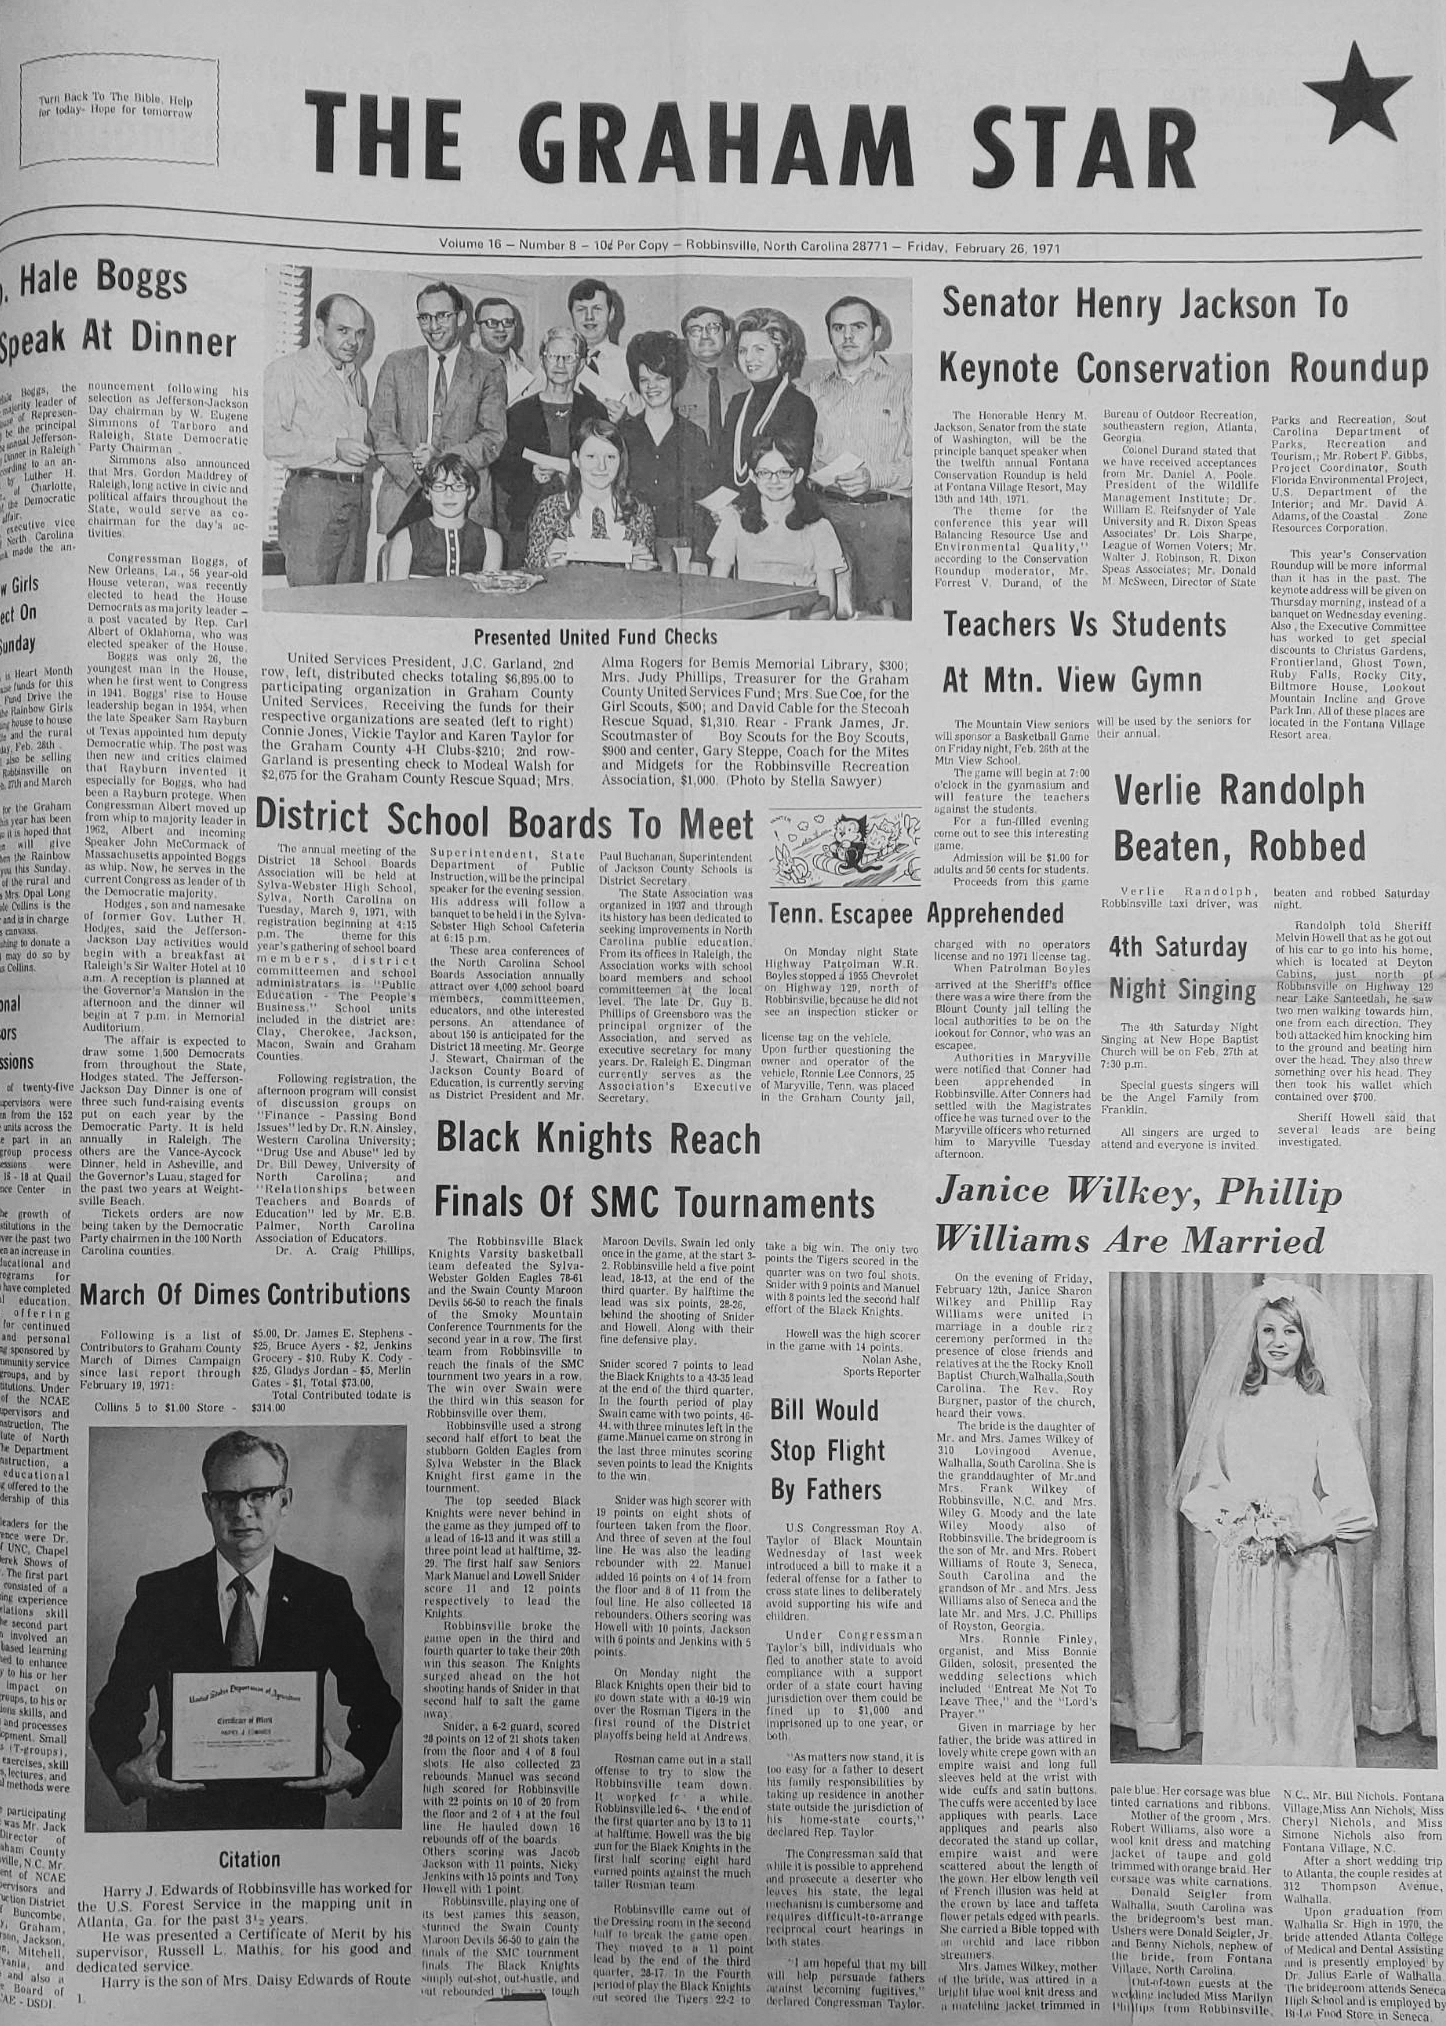 The Graham Star’s front page from 50 years ago (Feb. 26, 1971).